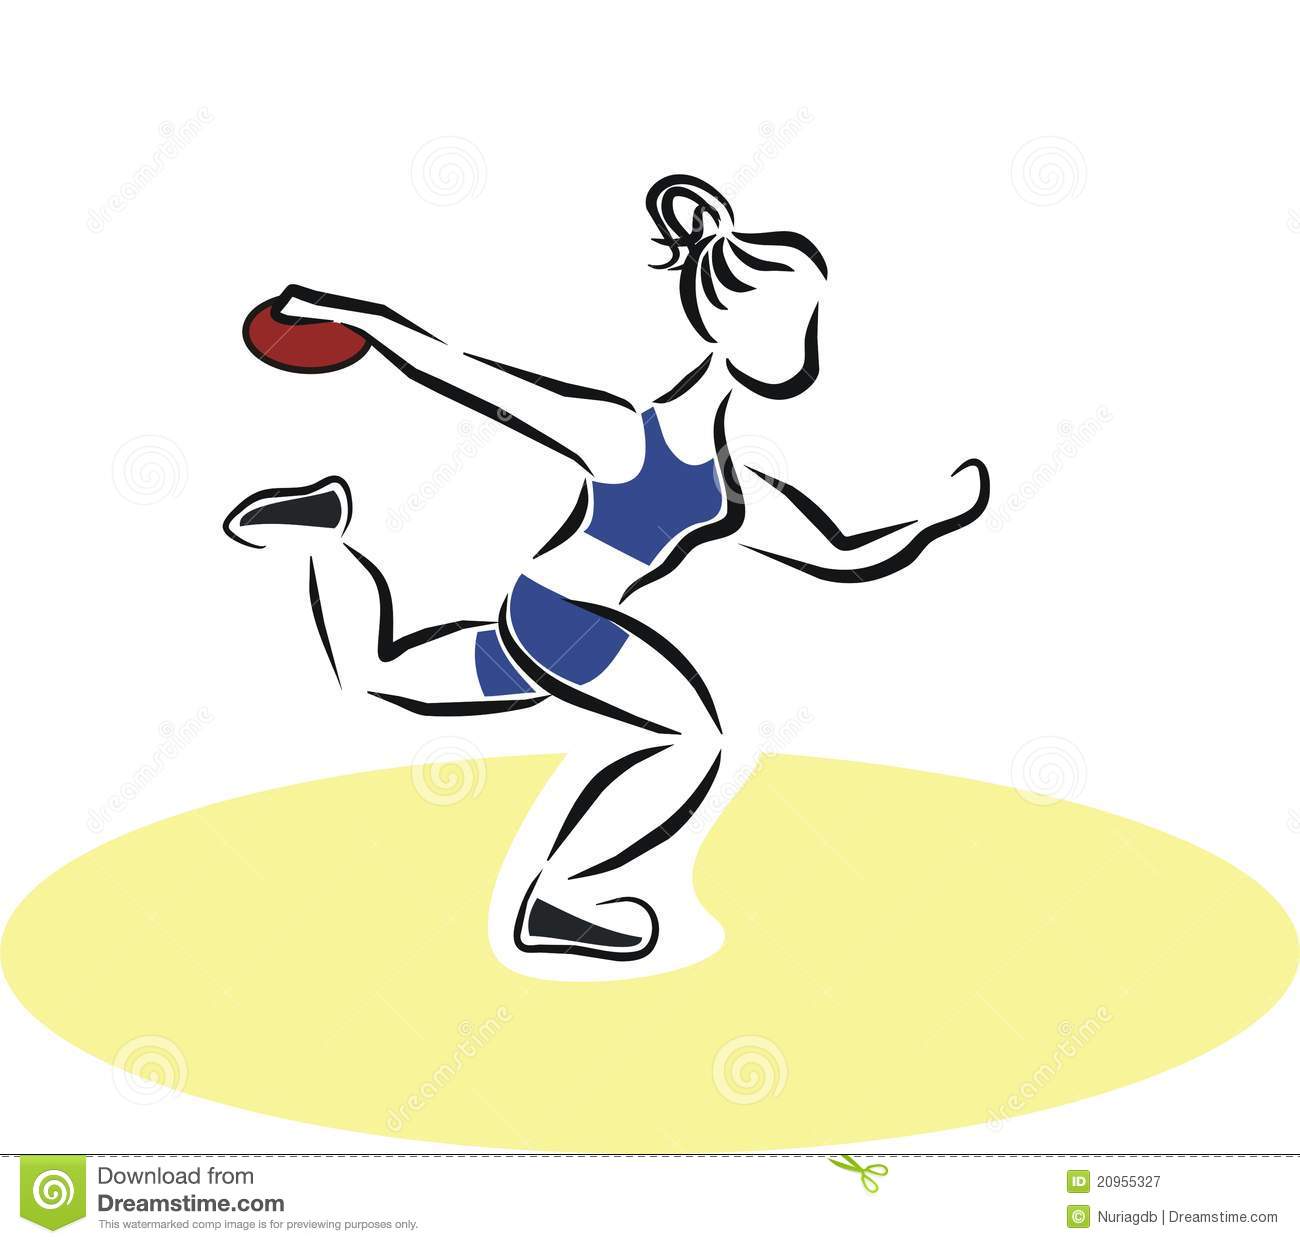 Discus Throw Royalty Free Stock Photography   Image  20955327